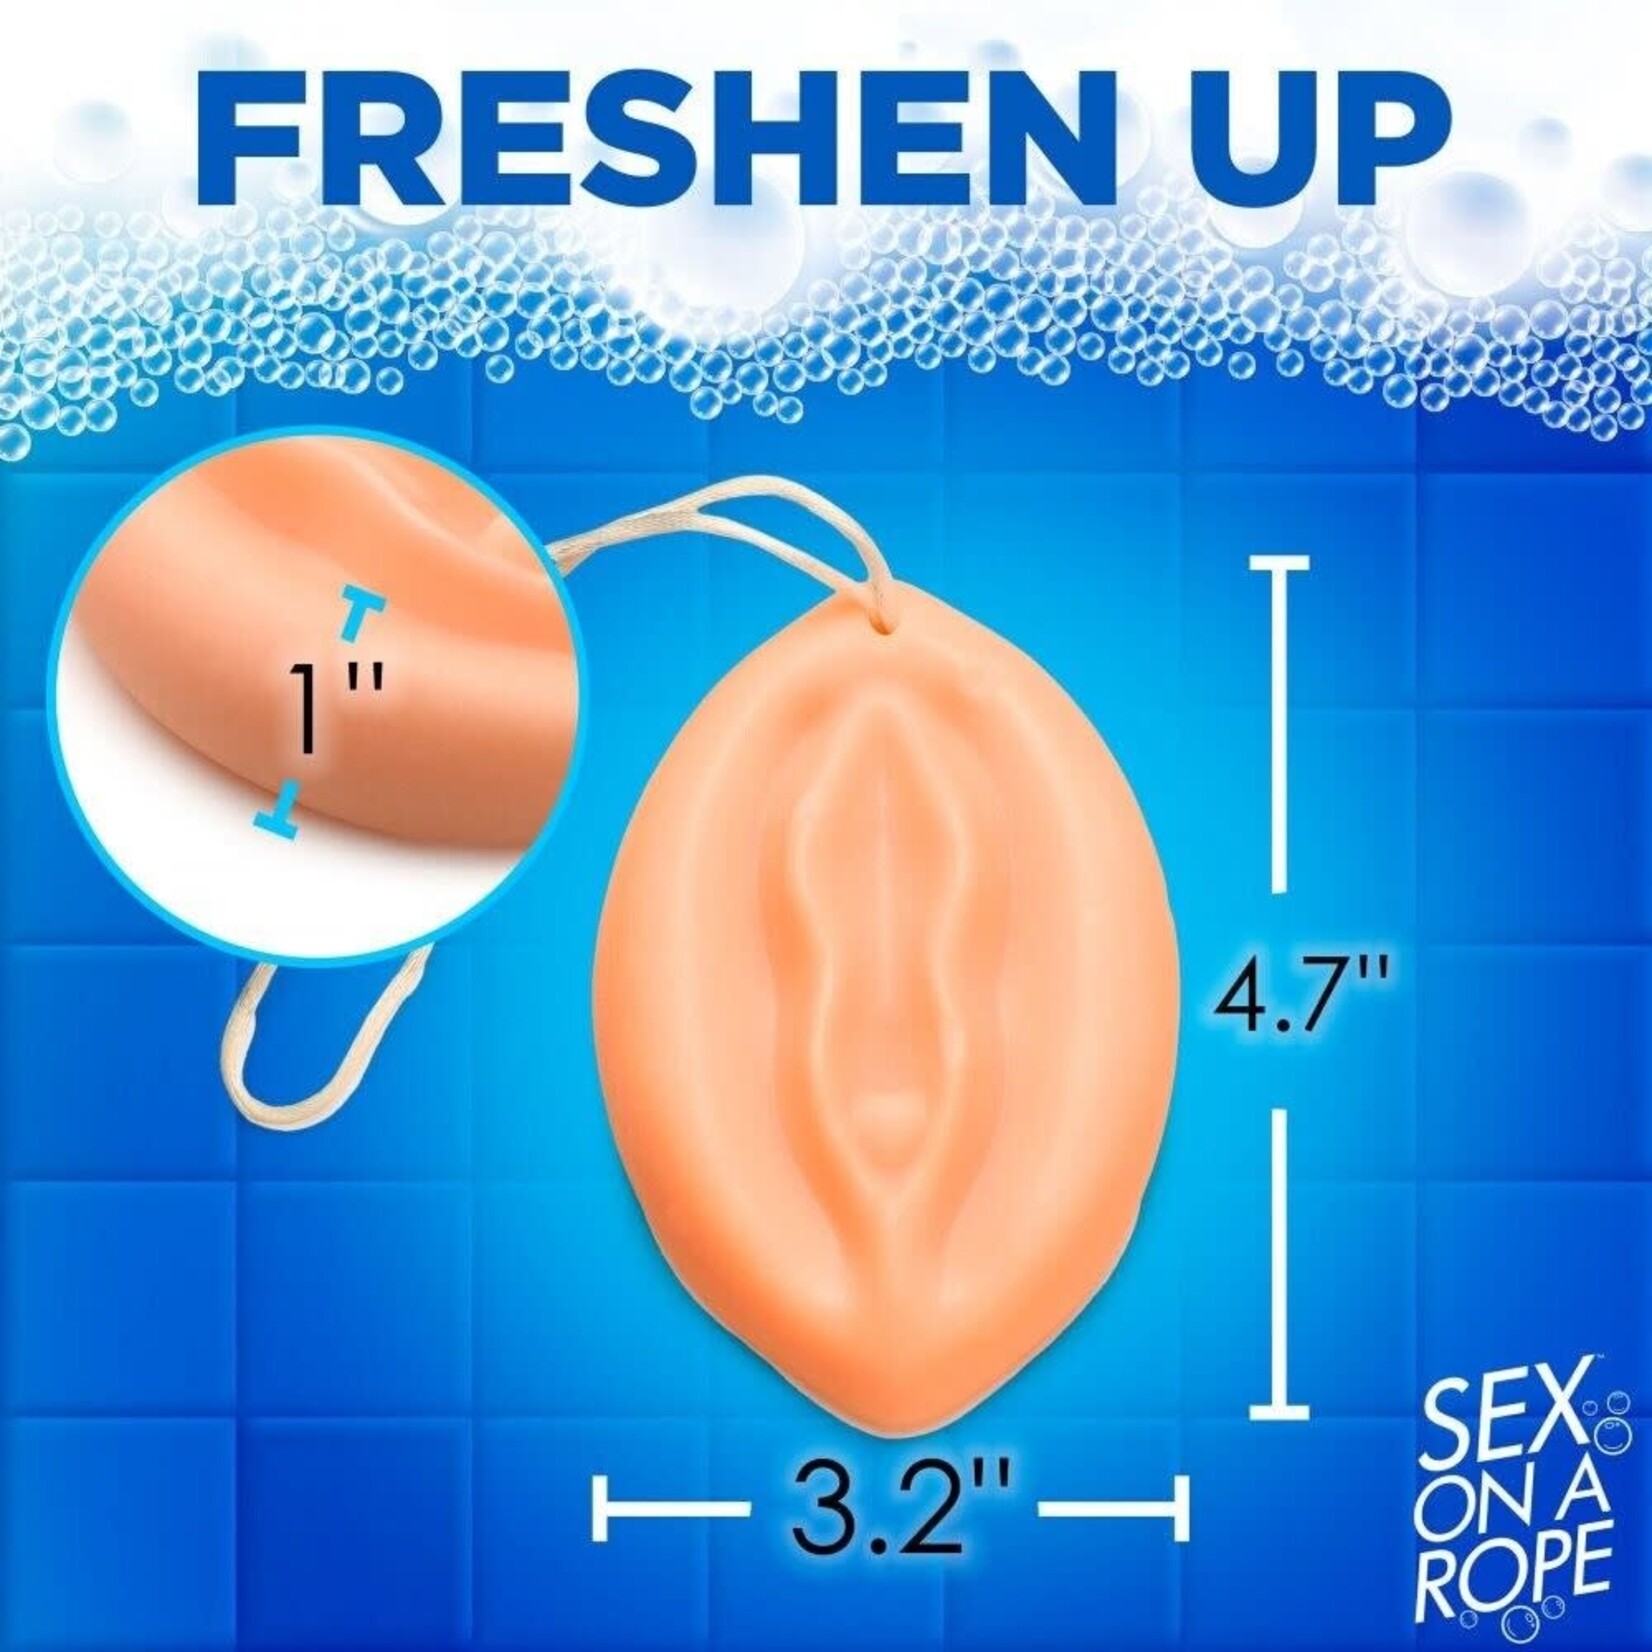 XR BRANDS SEX ON A ROPE - PUSSY SOAP